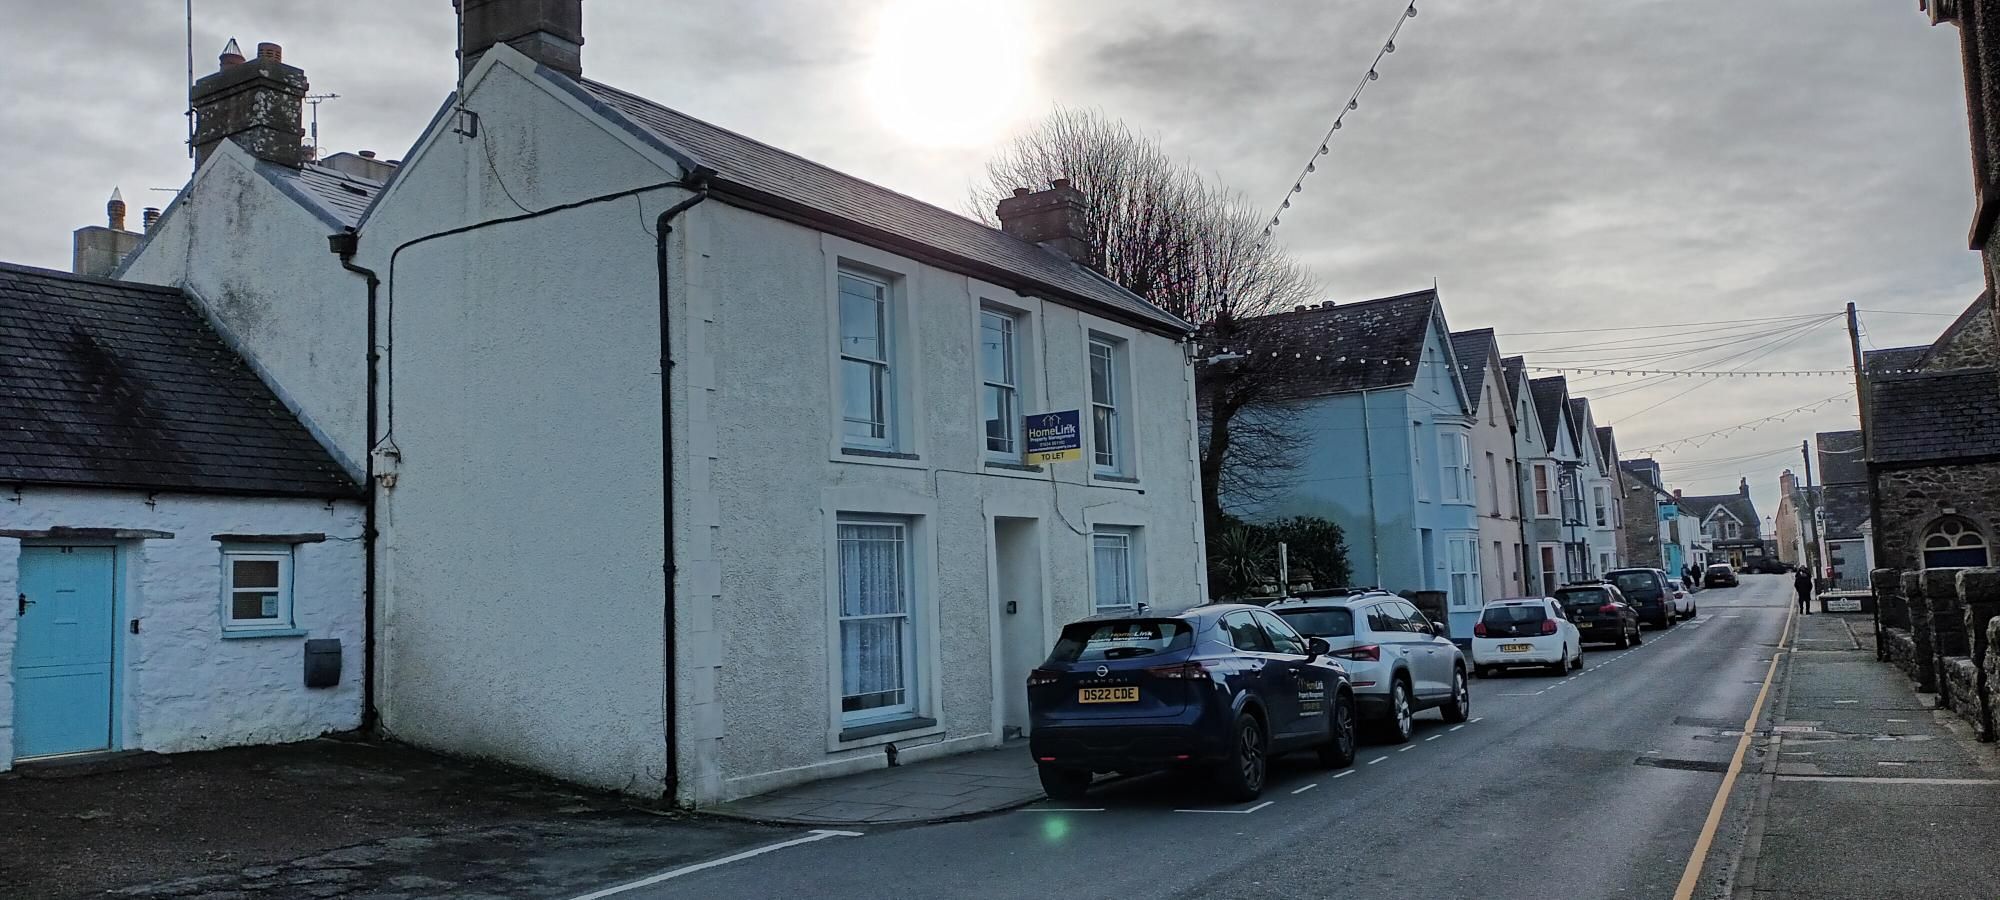 1 bed semi-detached house to rent in Ty llwyn, St Davids 0